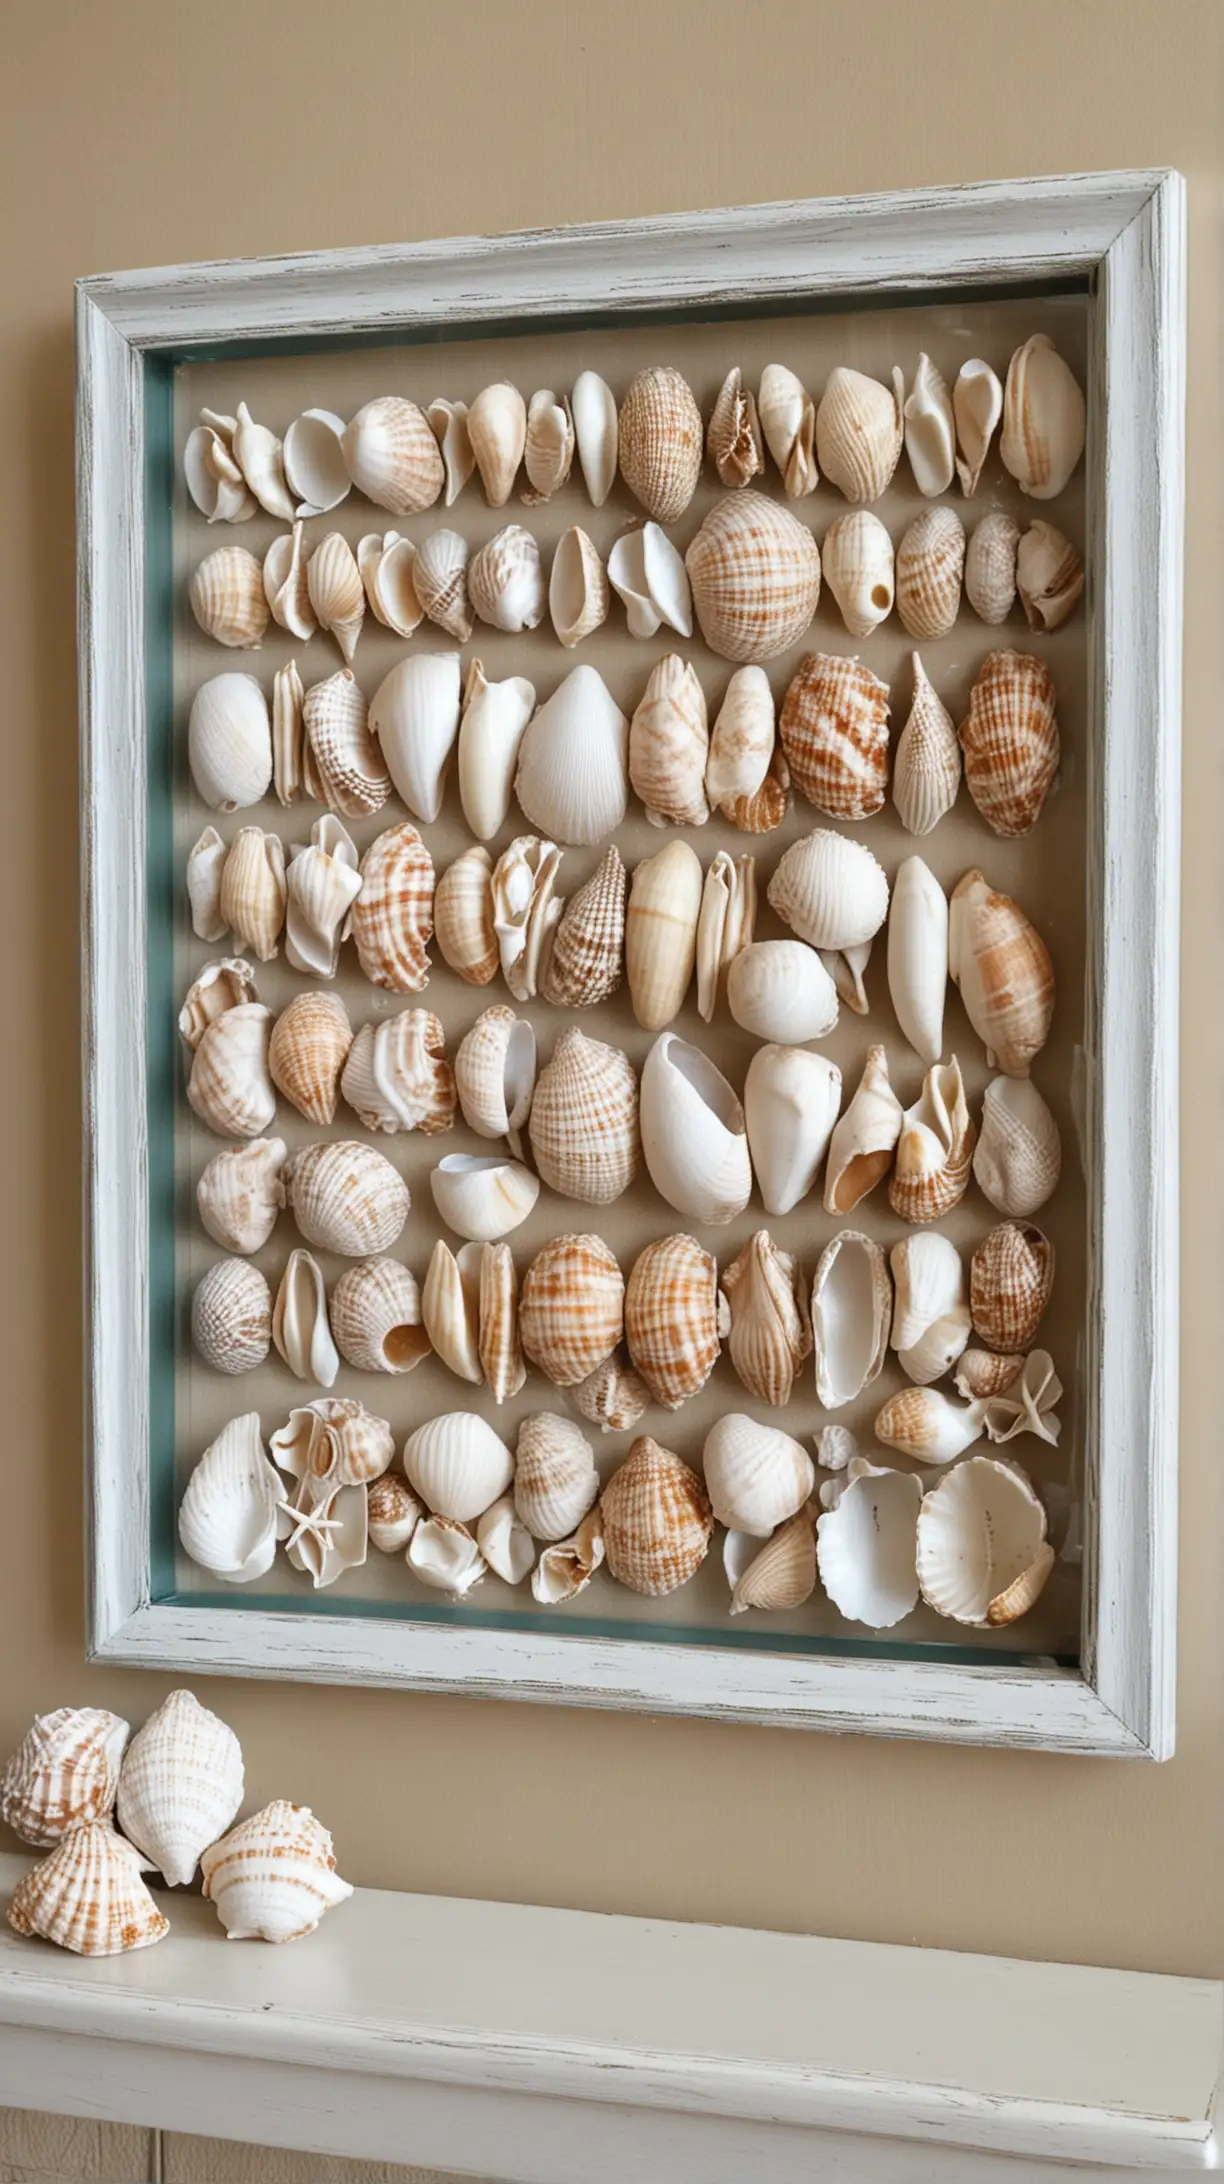 Coastal Chic Living Room with Shell Collection Displays